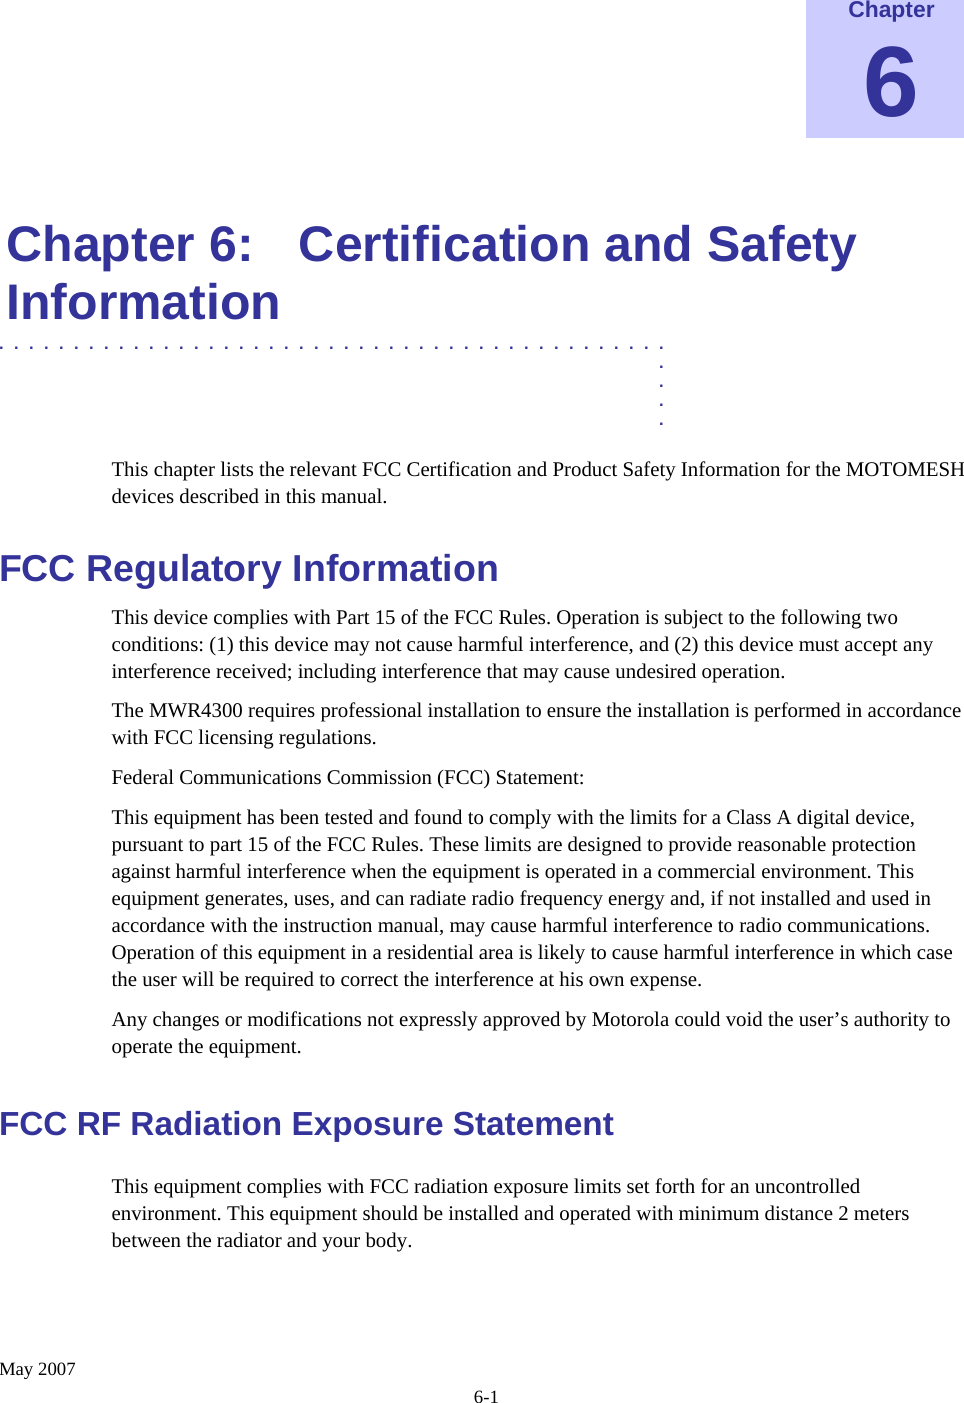    May 2007 6-1 Chapter 6  Chapter 6:  Certification and Safety Information .............................................  .  .  .  . This chapter lists the relevant FCC Certification and Product Safety Information for the MOTOMESH devices described in this manual. FCC Regulatory Information This device complies with Part 15 of the FCC Rules. Operation is subject to the following two conditions: (1) this device may not cause harmful interference, and (2) this device must accept any interference received; including interference that may cause undesired operation. The MWR4300 requires professional installation to ensure the installation is performed in accordance with FCC licensing regulations.   Federal Communications Commission (FCC) Statement: This equipment has been tested and found to comply with the limits for a Class A digital device, pursuant to part 15 of the FCC Rules. These limits are designed to provide reasonable protection against harmful interference when the equipment is operated in a commercial environment. This equipment generates, uses, and can radiate radio frequency energy and, if not installed and used in accordance with the instruction manual, may cause harmful interference to radio communications. Operation of this equipment in a residential area is likely to cause harmful interference in which case the user will be required to correct the interference at his own expense.  Any changes or modifications not expressly approved by Motorola could void the user’s authority to operate the equipment. FCC RF Radiation Exposure Statement This equipment complies with FCC radiation exposure limits set forth for an uncontrolled environment. This equipment should be installed and operated with minimum distance 2 meters      between the radiator and your body.  